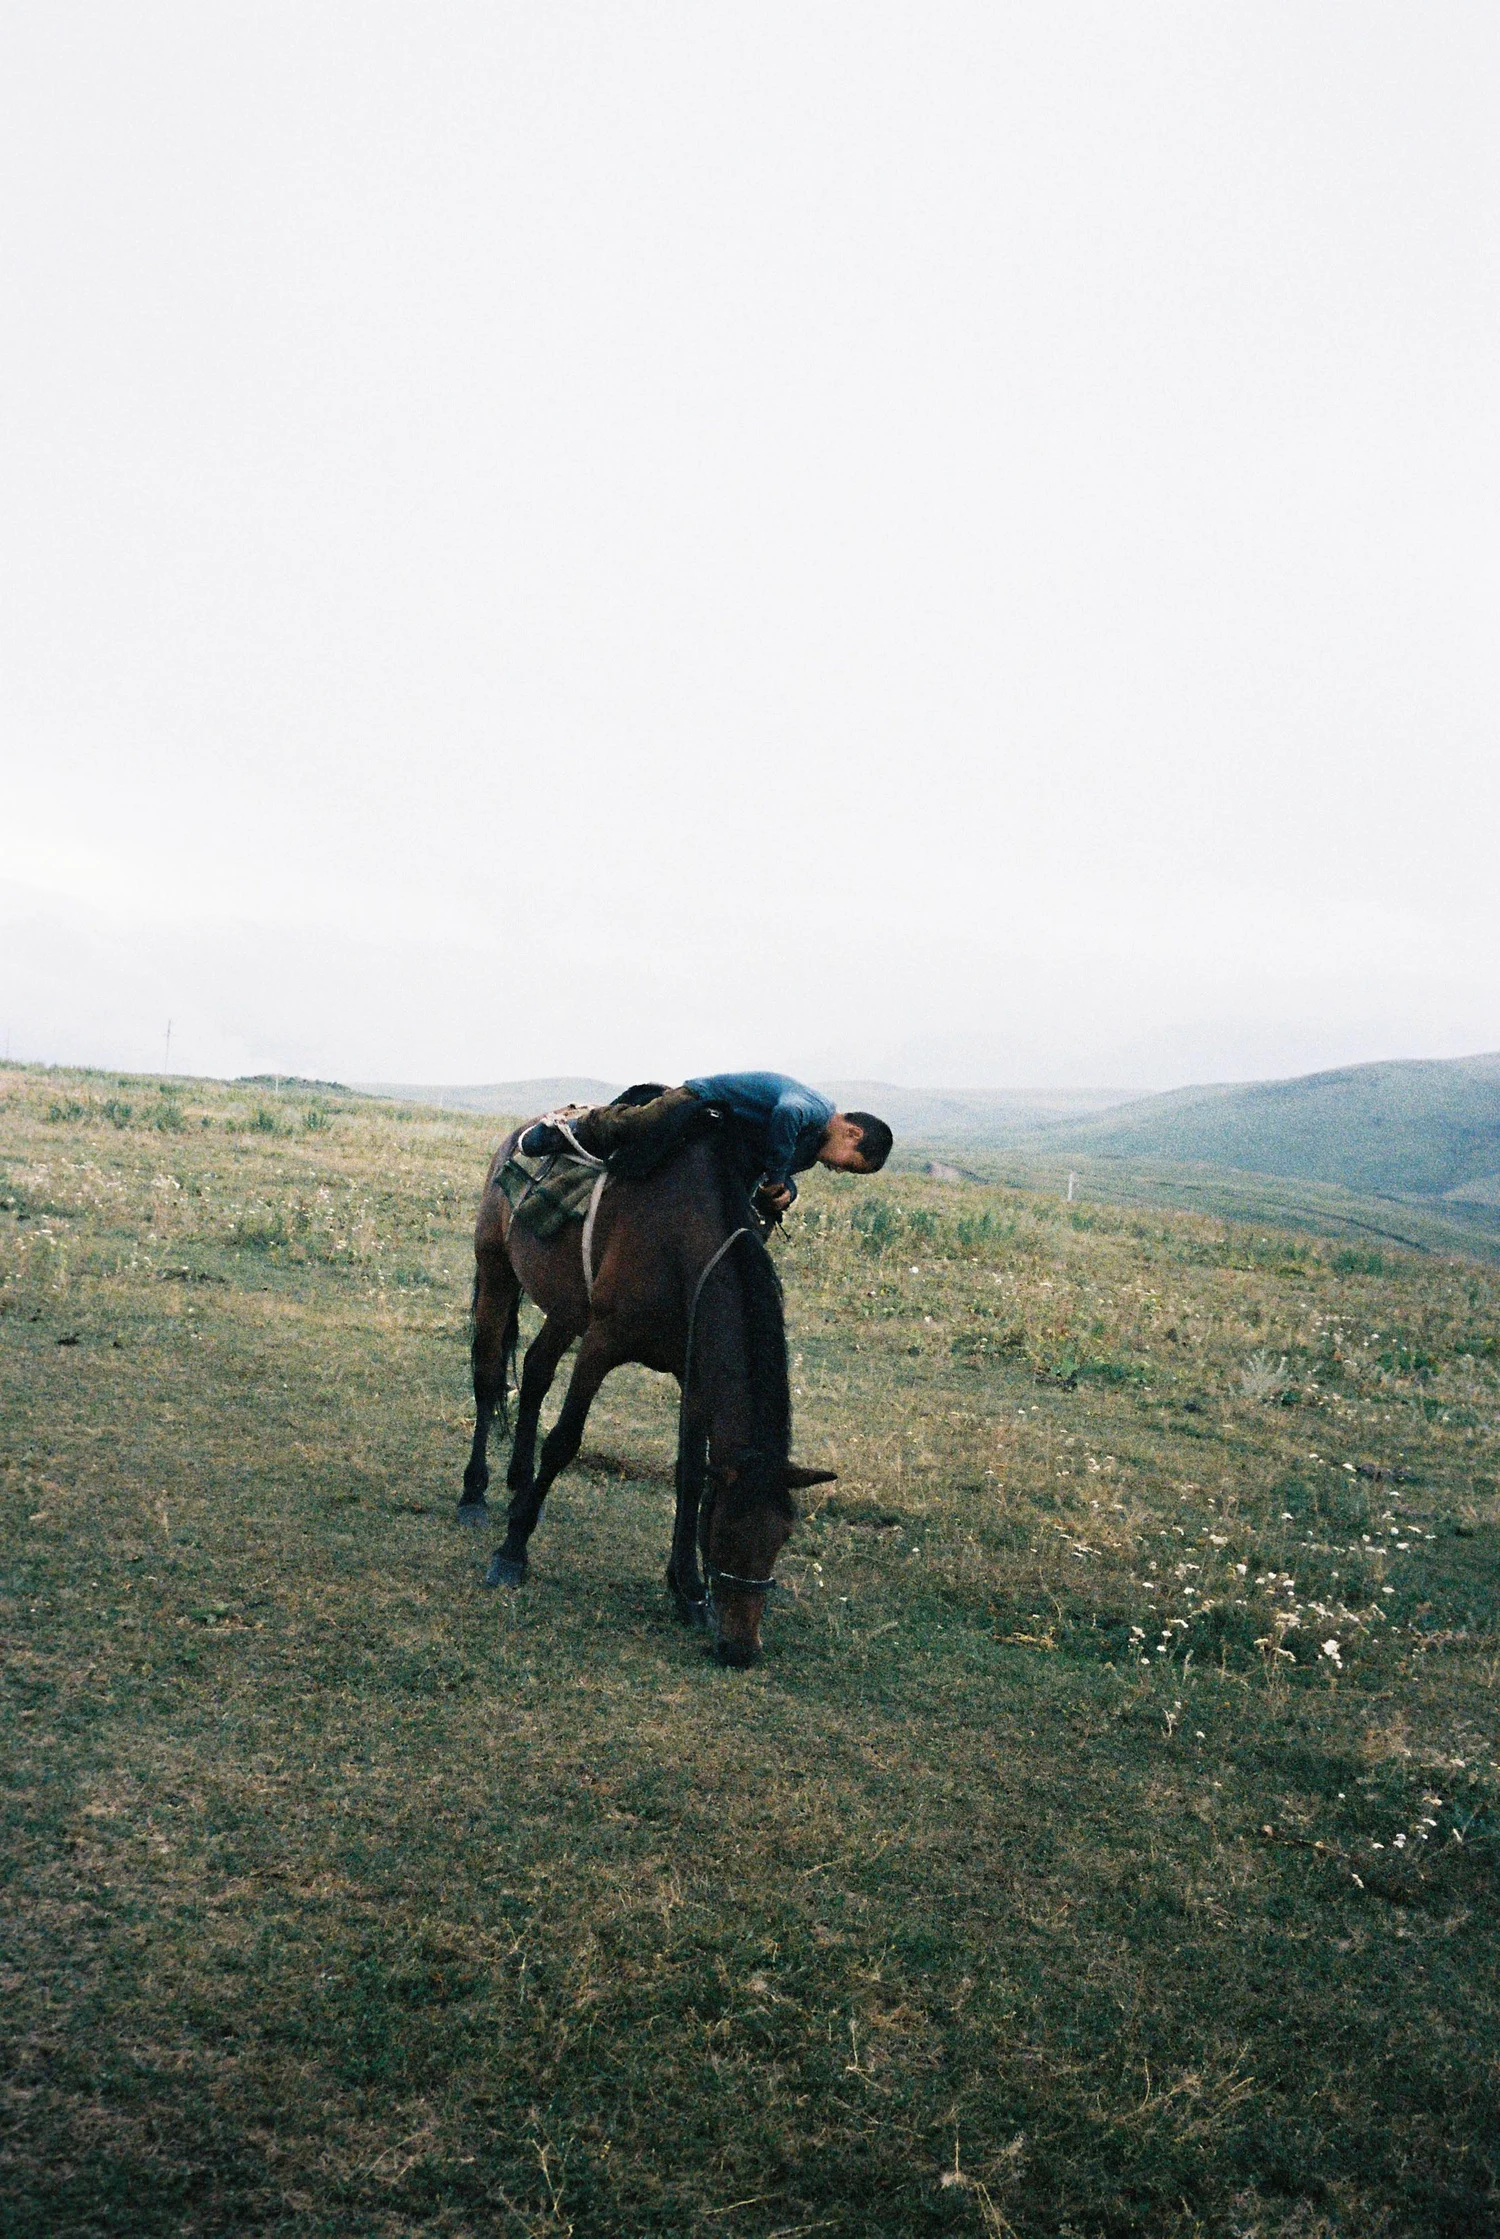 A photo of a boy on a horse in the Kazakh steppe, surrounded by mountains and fields while the horse is eating grass.